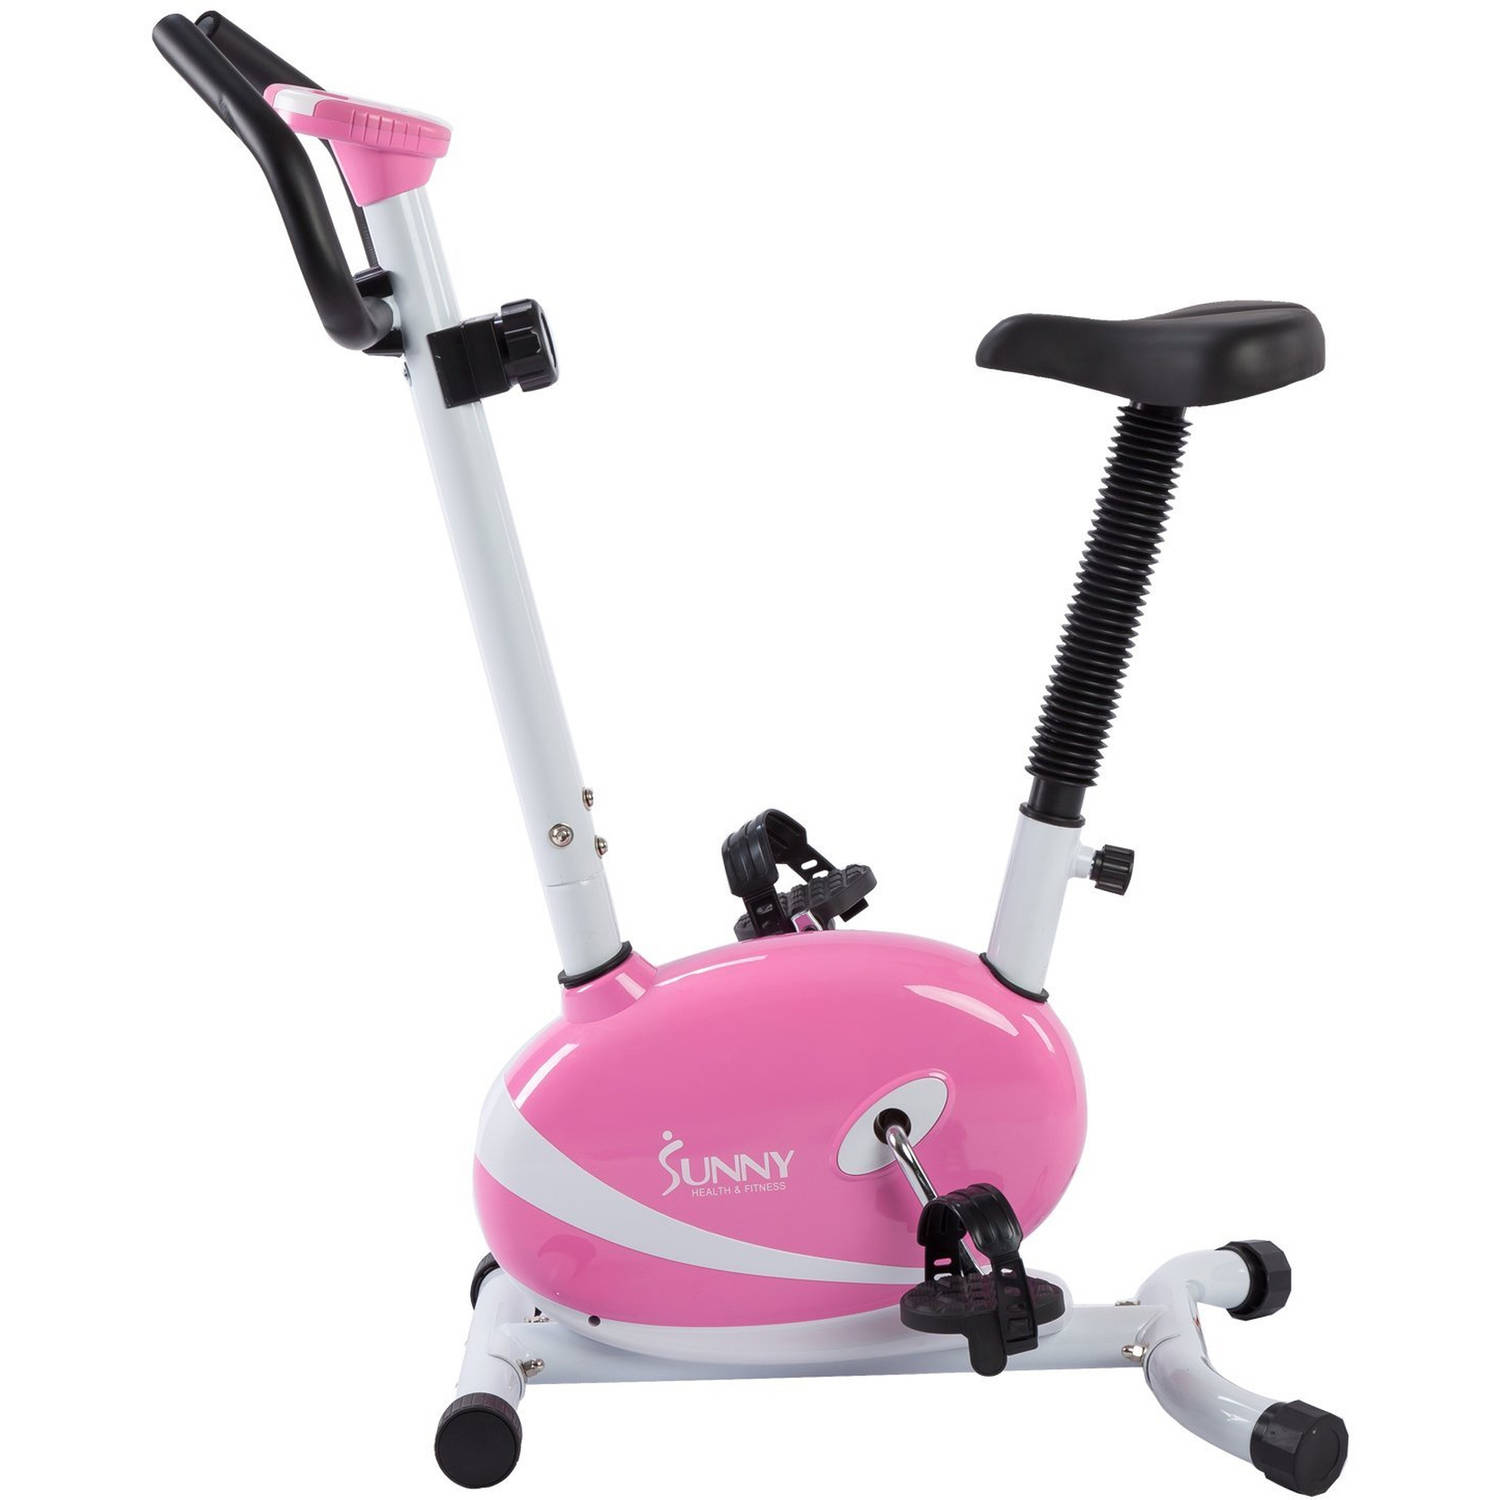 Sunny Health & Fitness P8200 Pink Magnetic Upright Exercise Bike - image 1 of 7